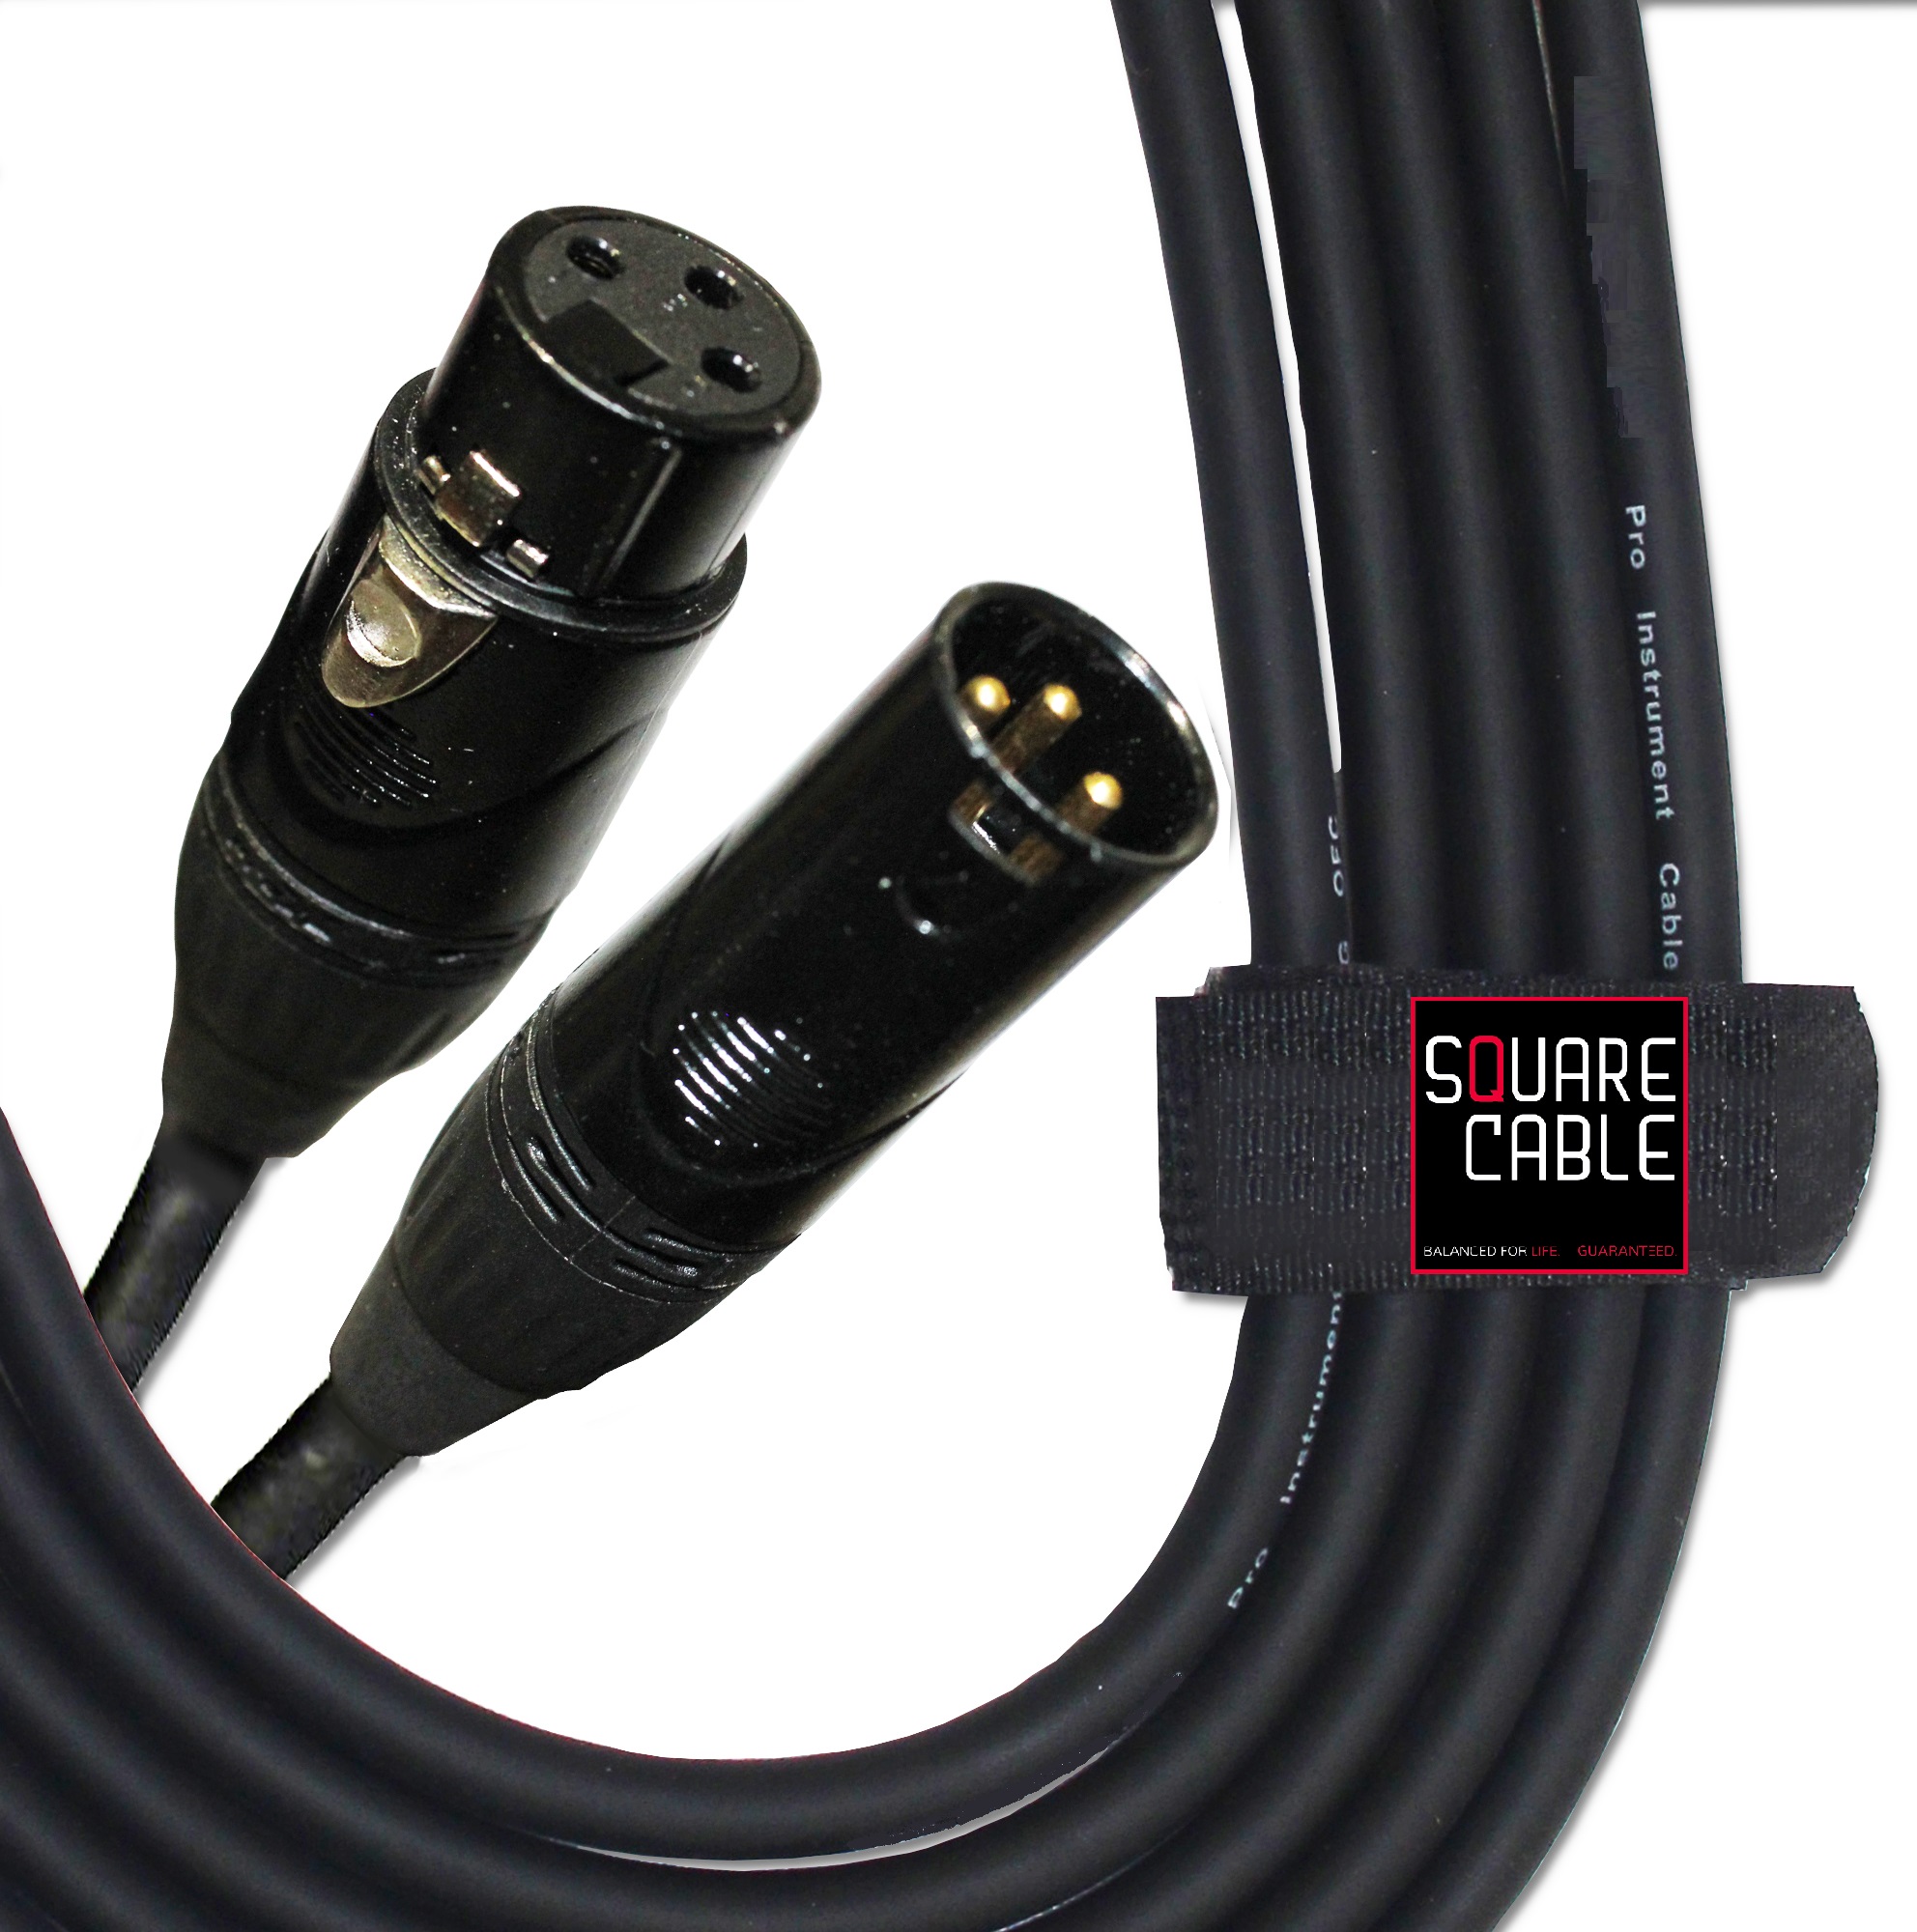 square-cable-dmx-100--100ft-dmx-cable-3-pin.jpg